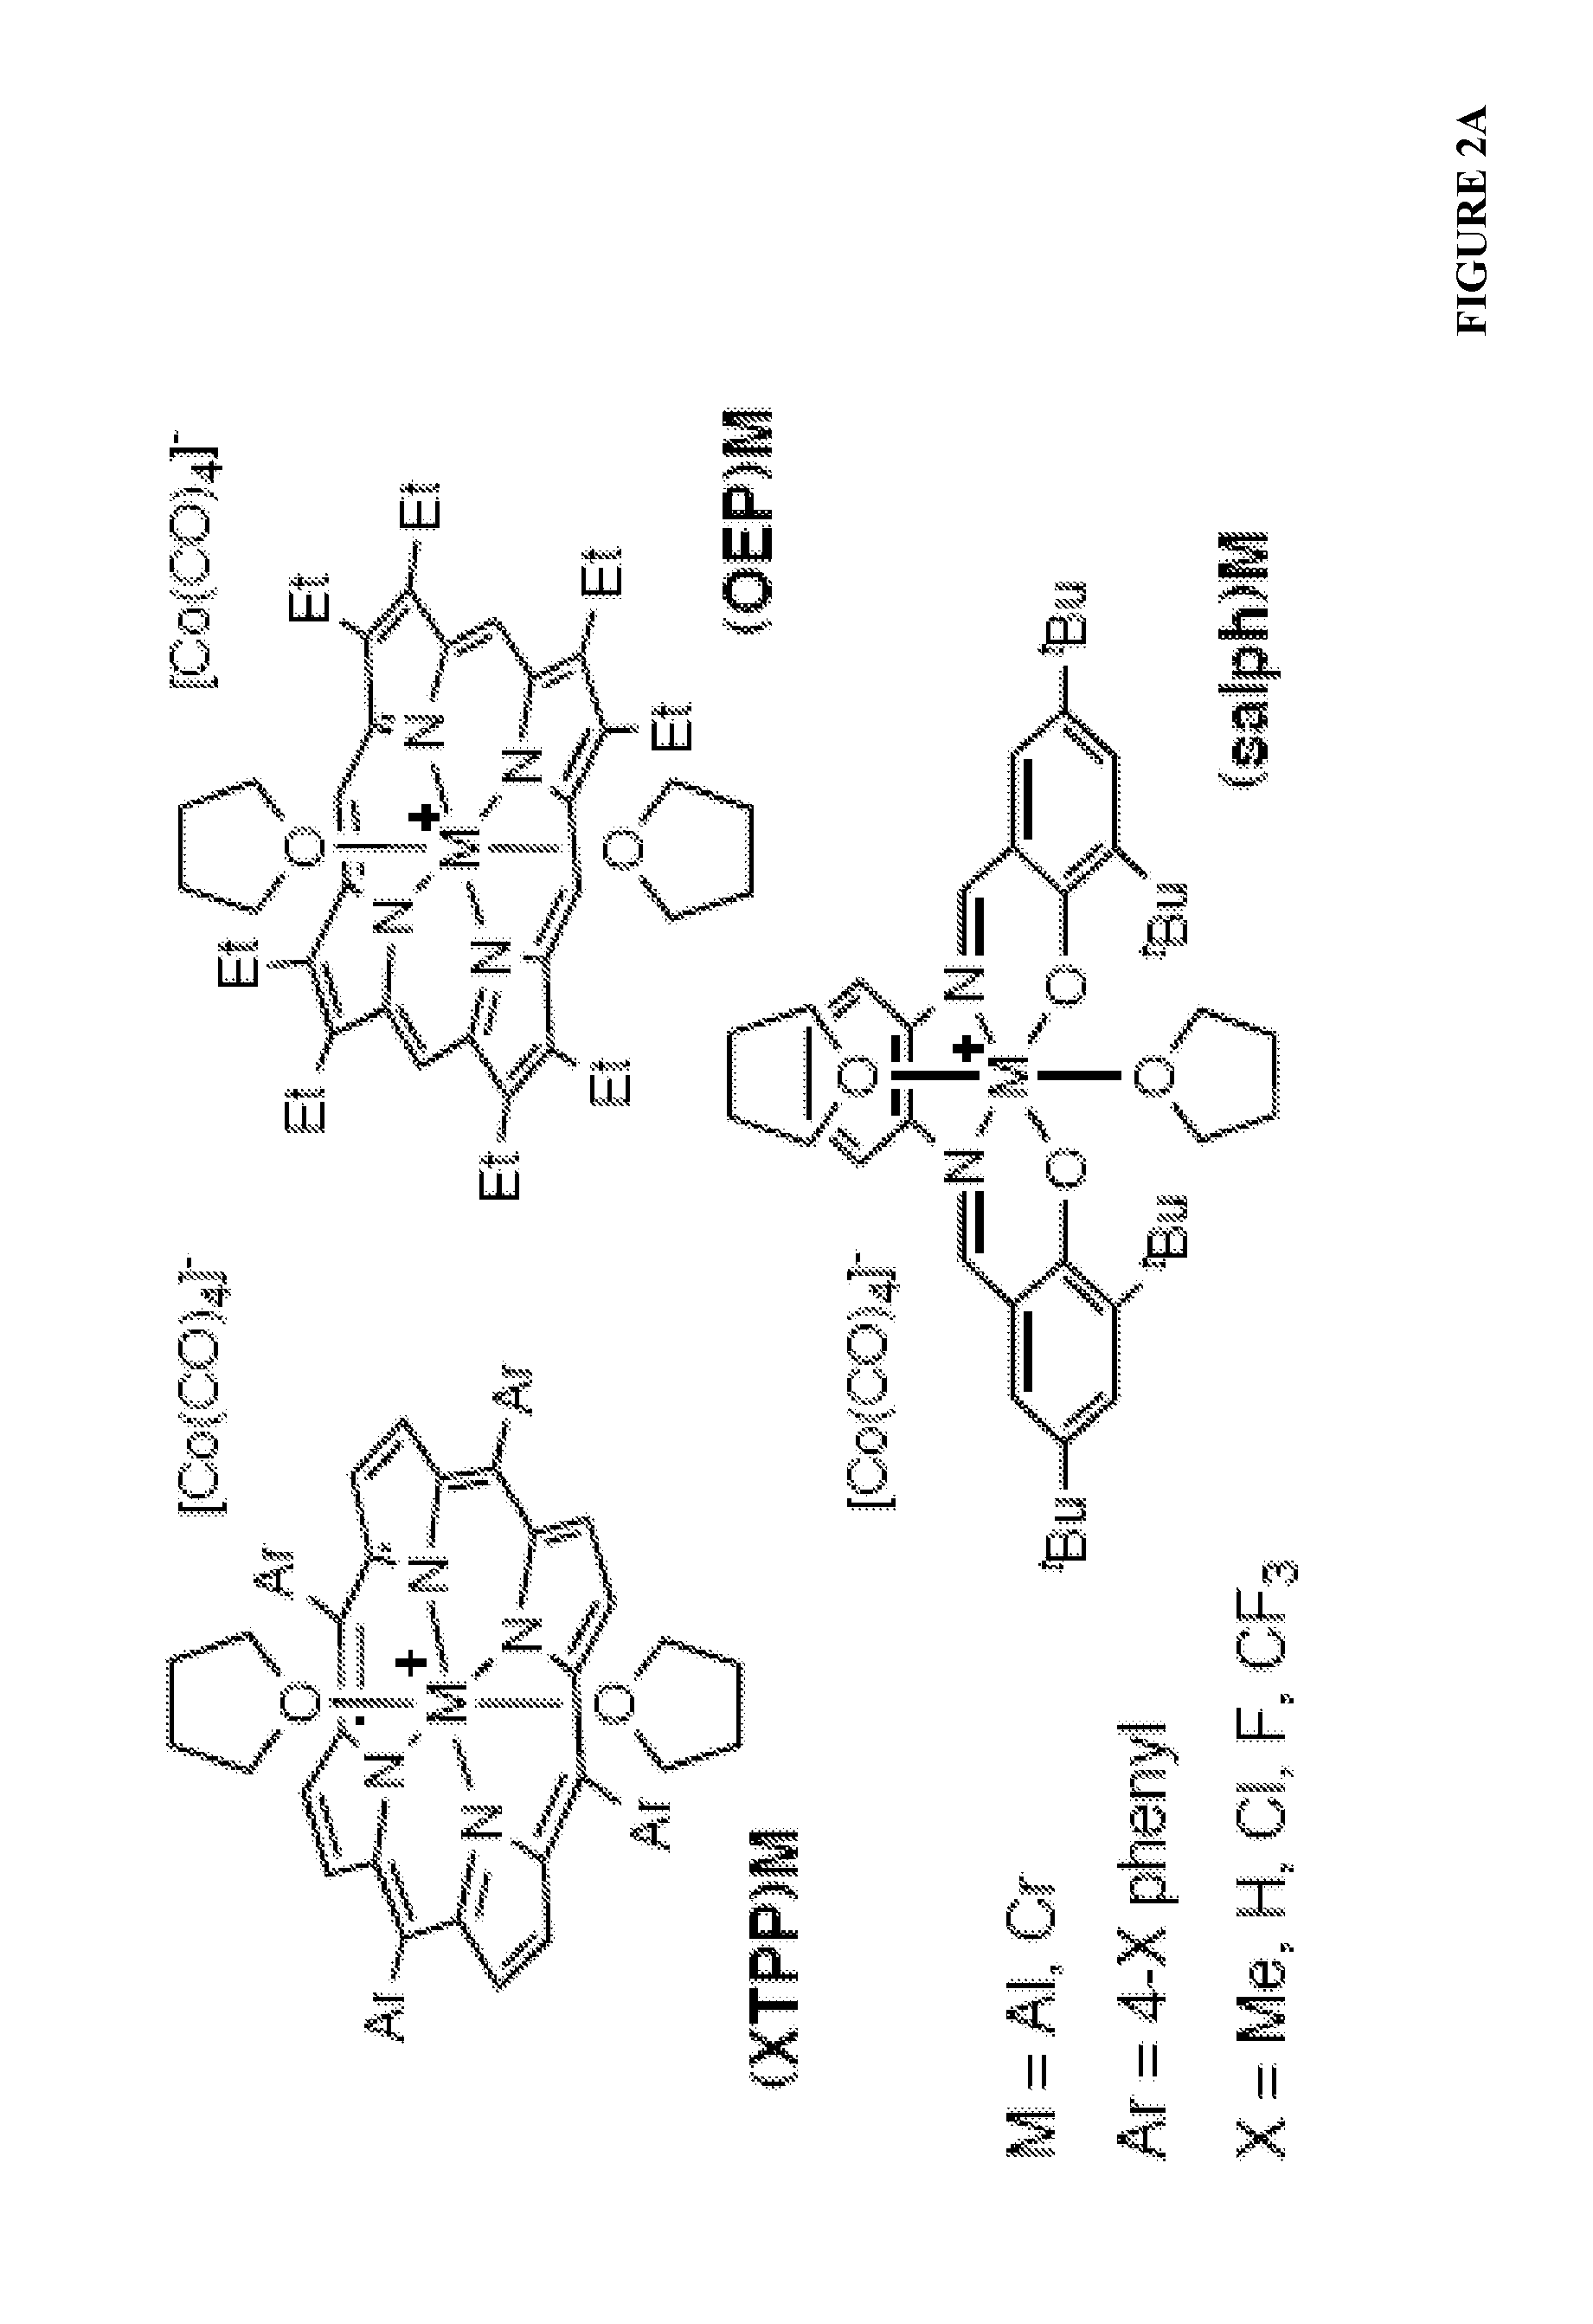 Succinic anhydrides from epoxides